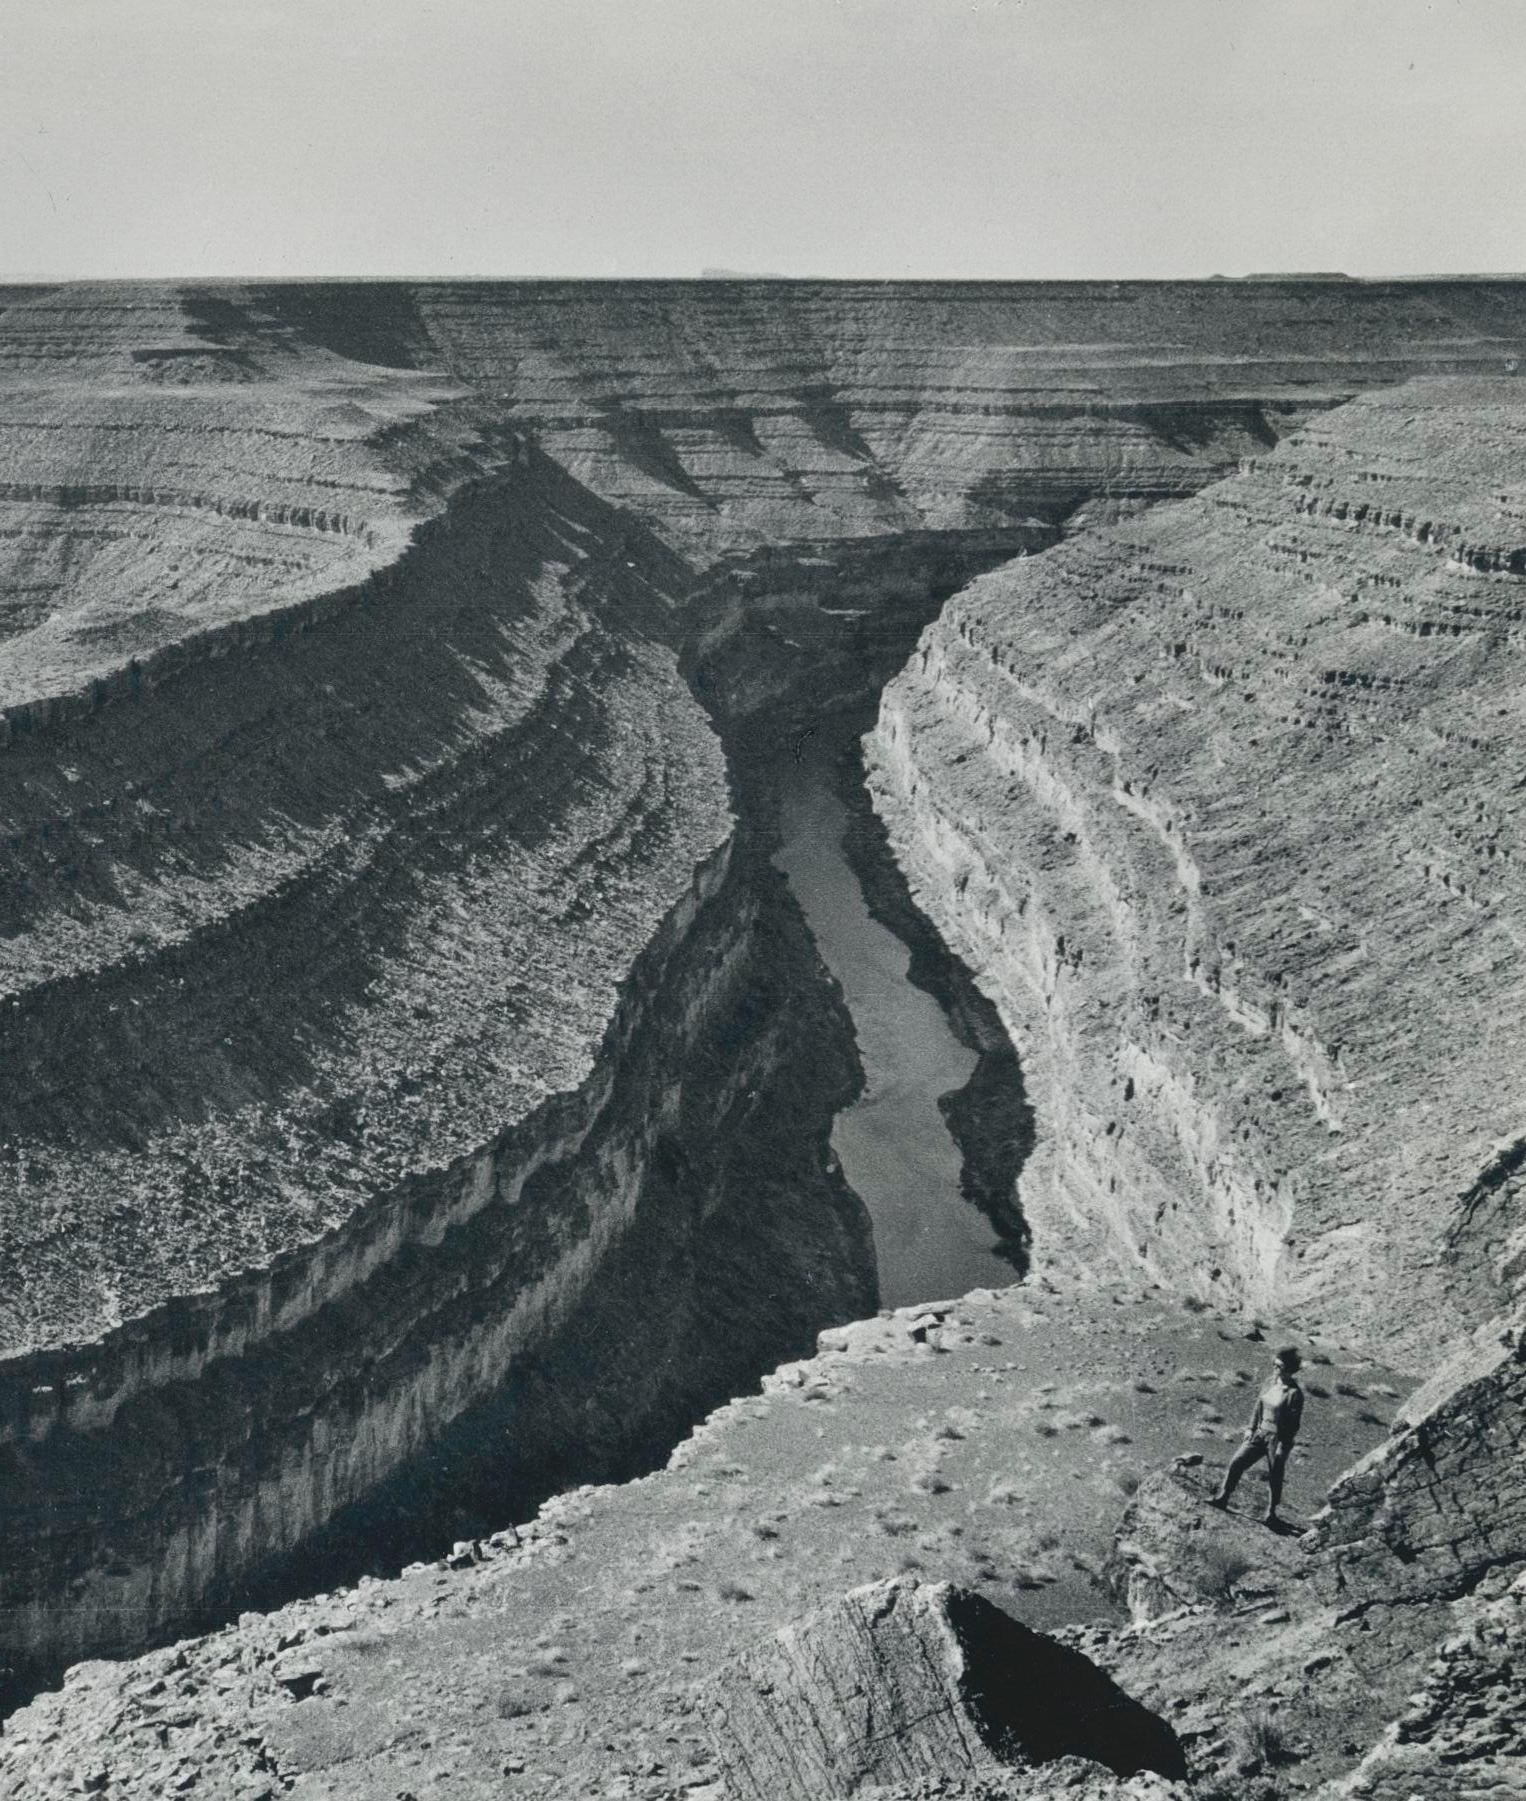 Gooseneck, Grand Canyon, Utah, Black and White, USA 1960s, 17, 8 x 23, 3 cm - Photograph by Erich Andres